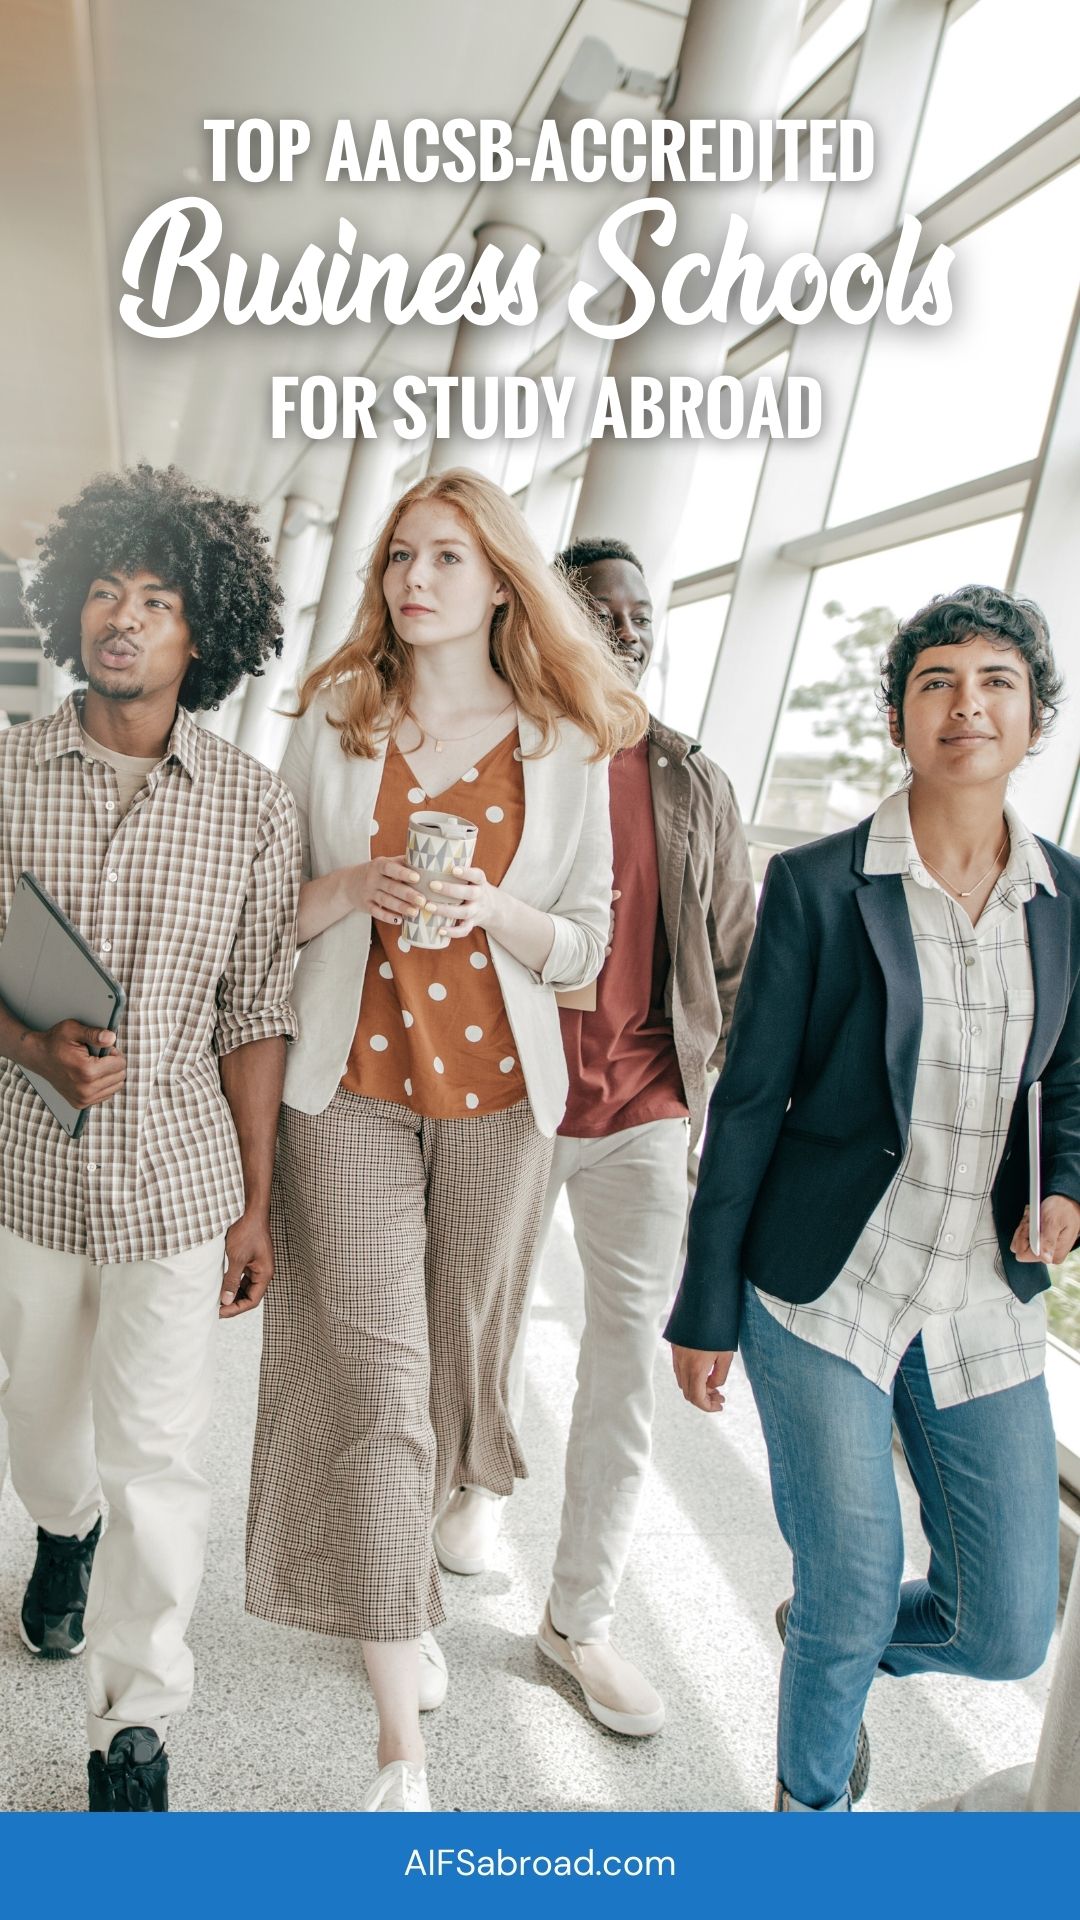 Pin image: Group of college students in business attire walking through hallway with text "Top AACSB-Accredited Business Schools for Study Abroad"